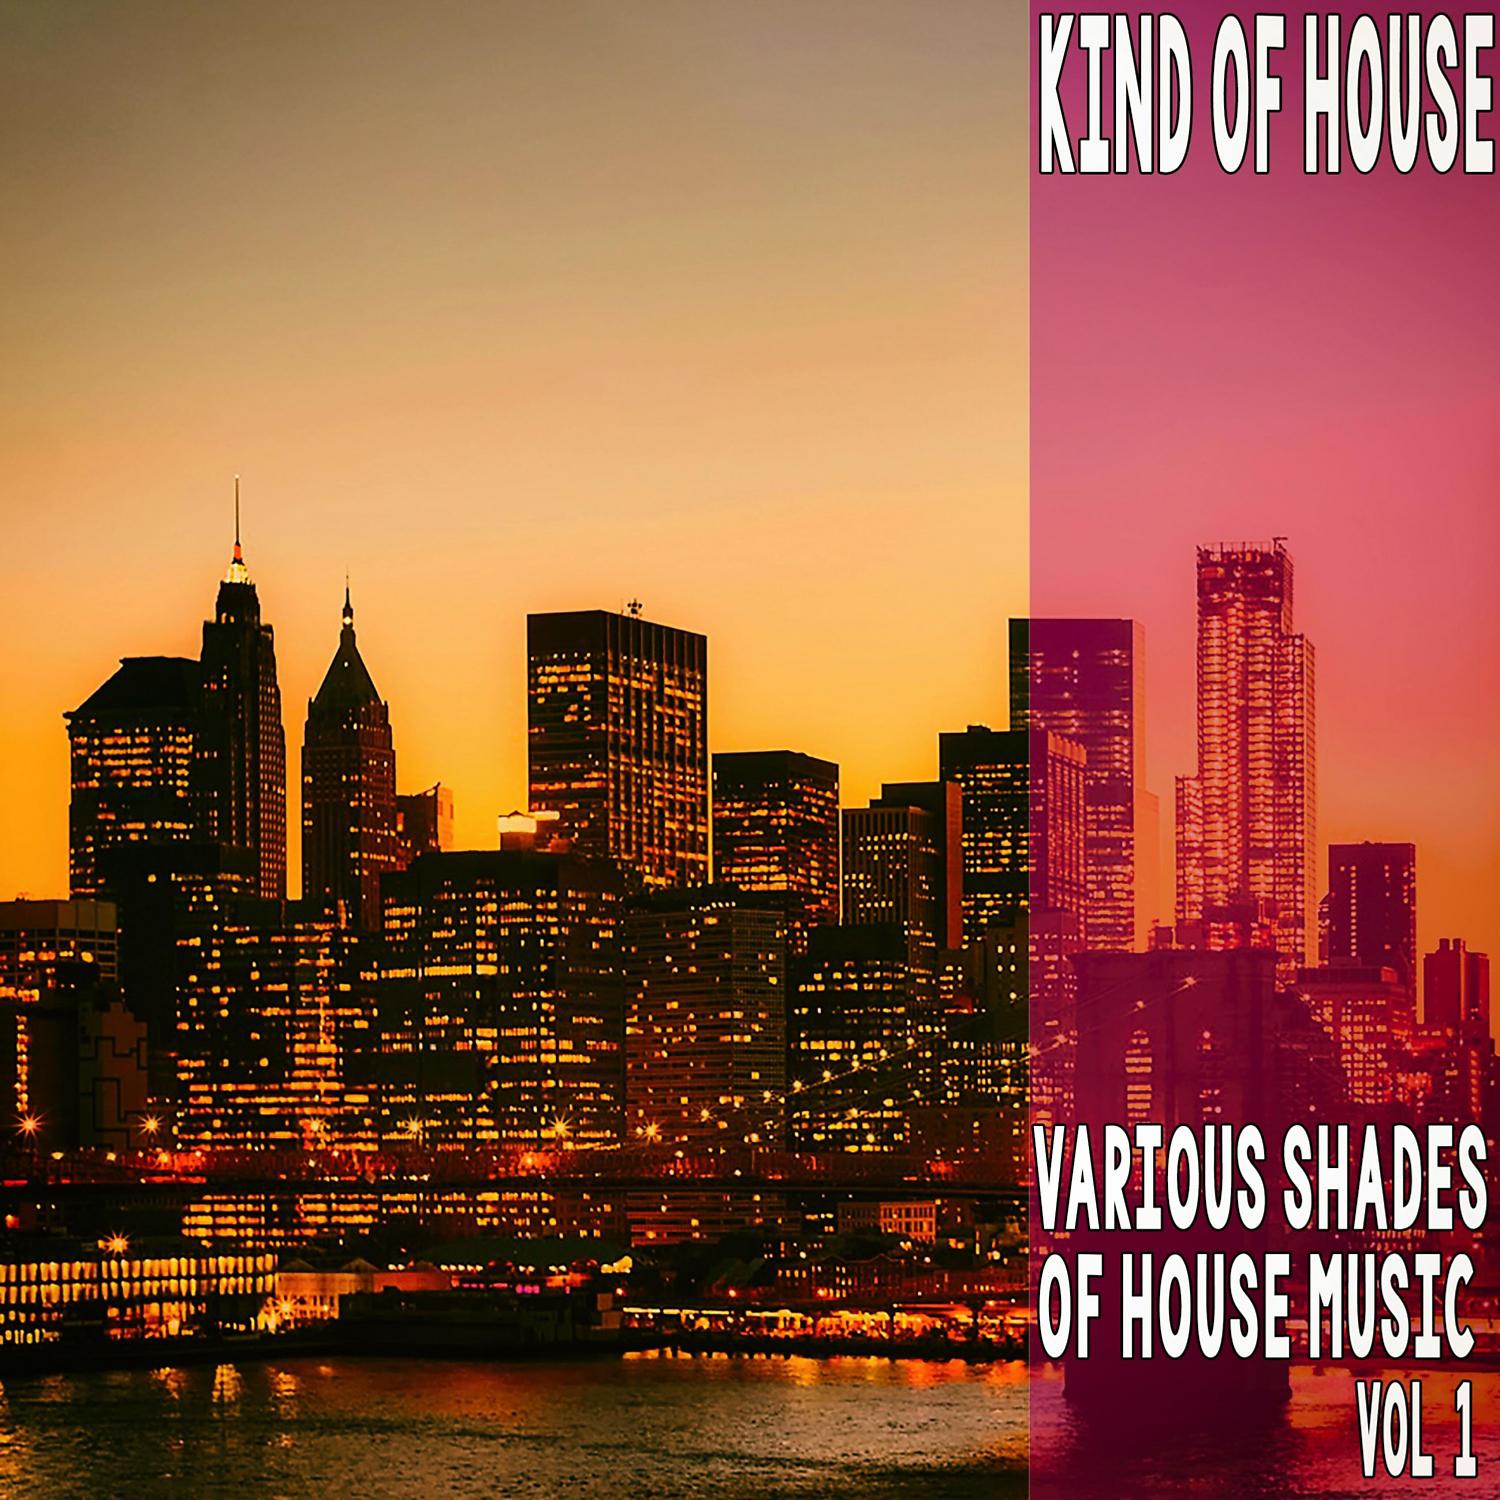 Постер альбома Kind of House, Vol. 1 - Various Shades of House Music